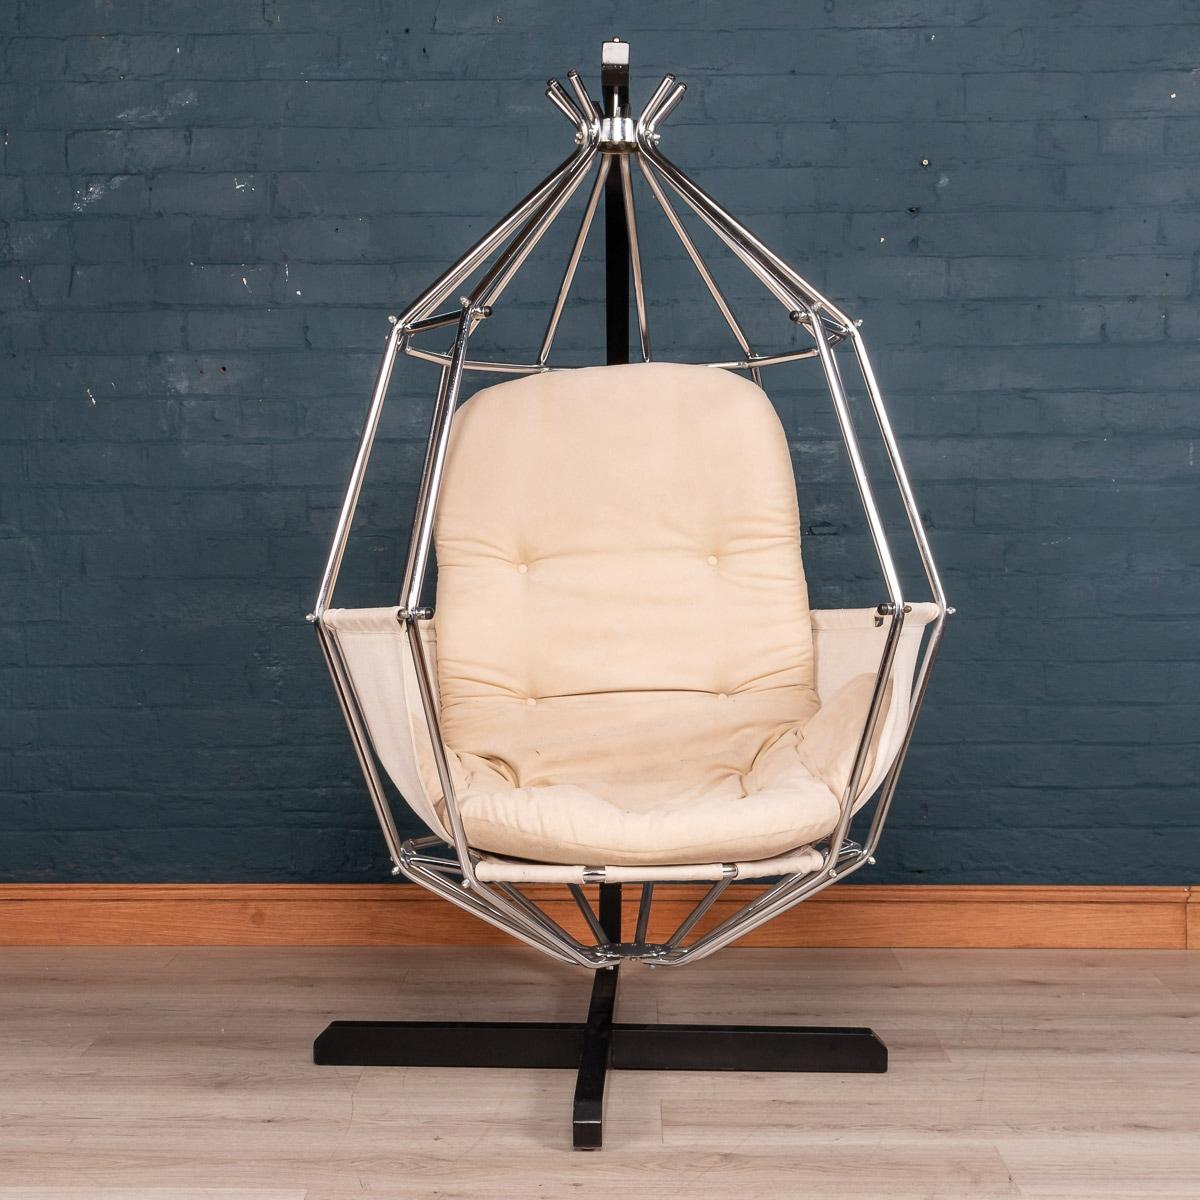 Iconic Swedish Ib Arberg design parrot cage chair, circa 1970-1980. Original cotton canvas upholstery, nickel-plated swing cage with a black enamel steel base.
     